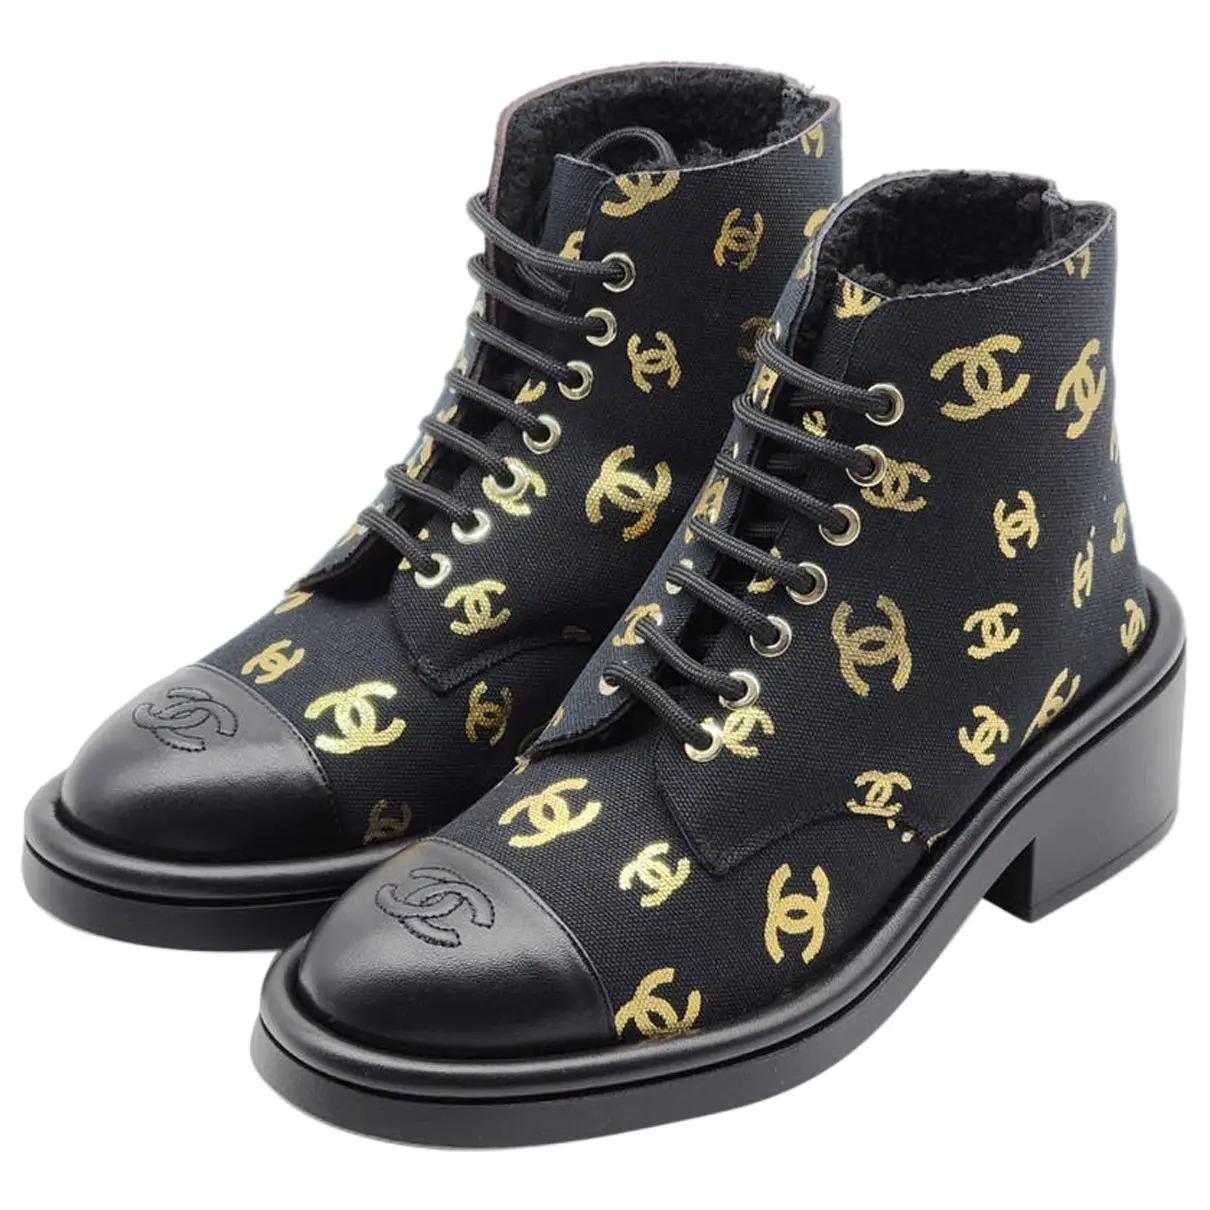 Cloth lace up boots Chanel